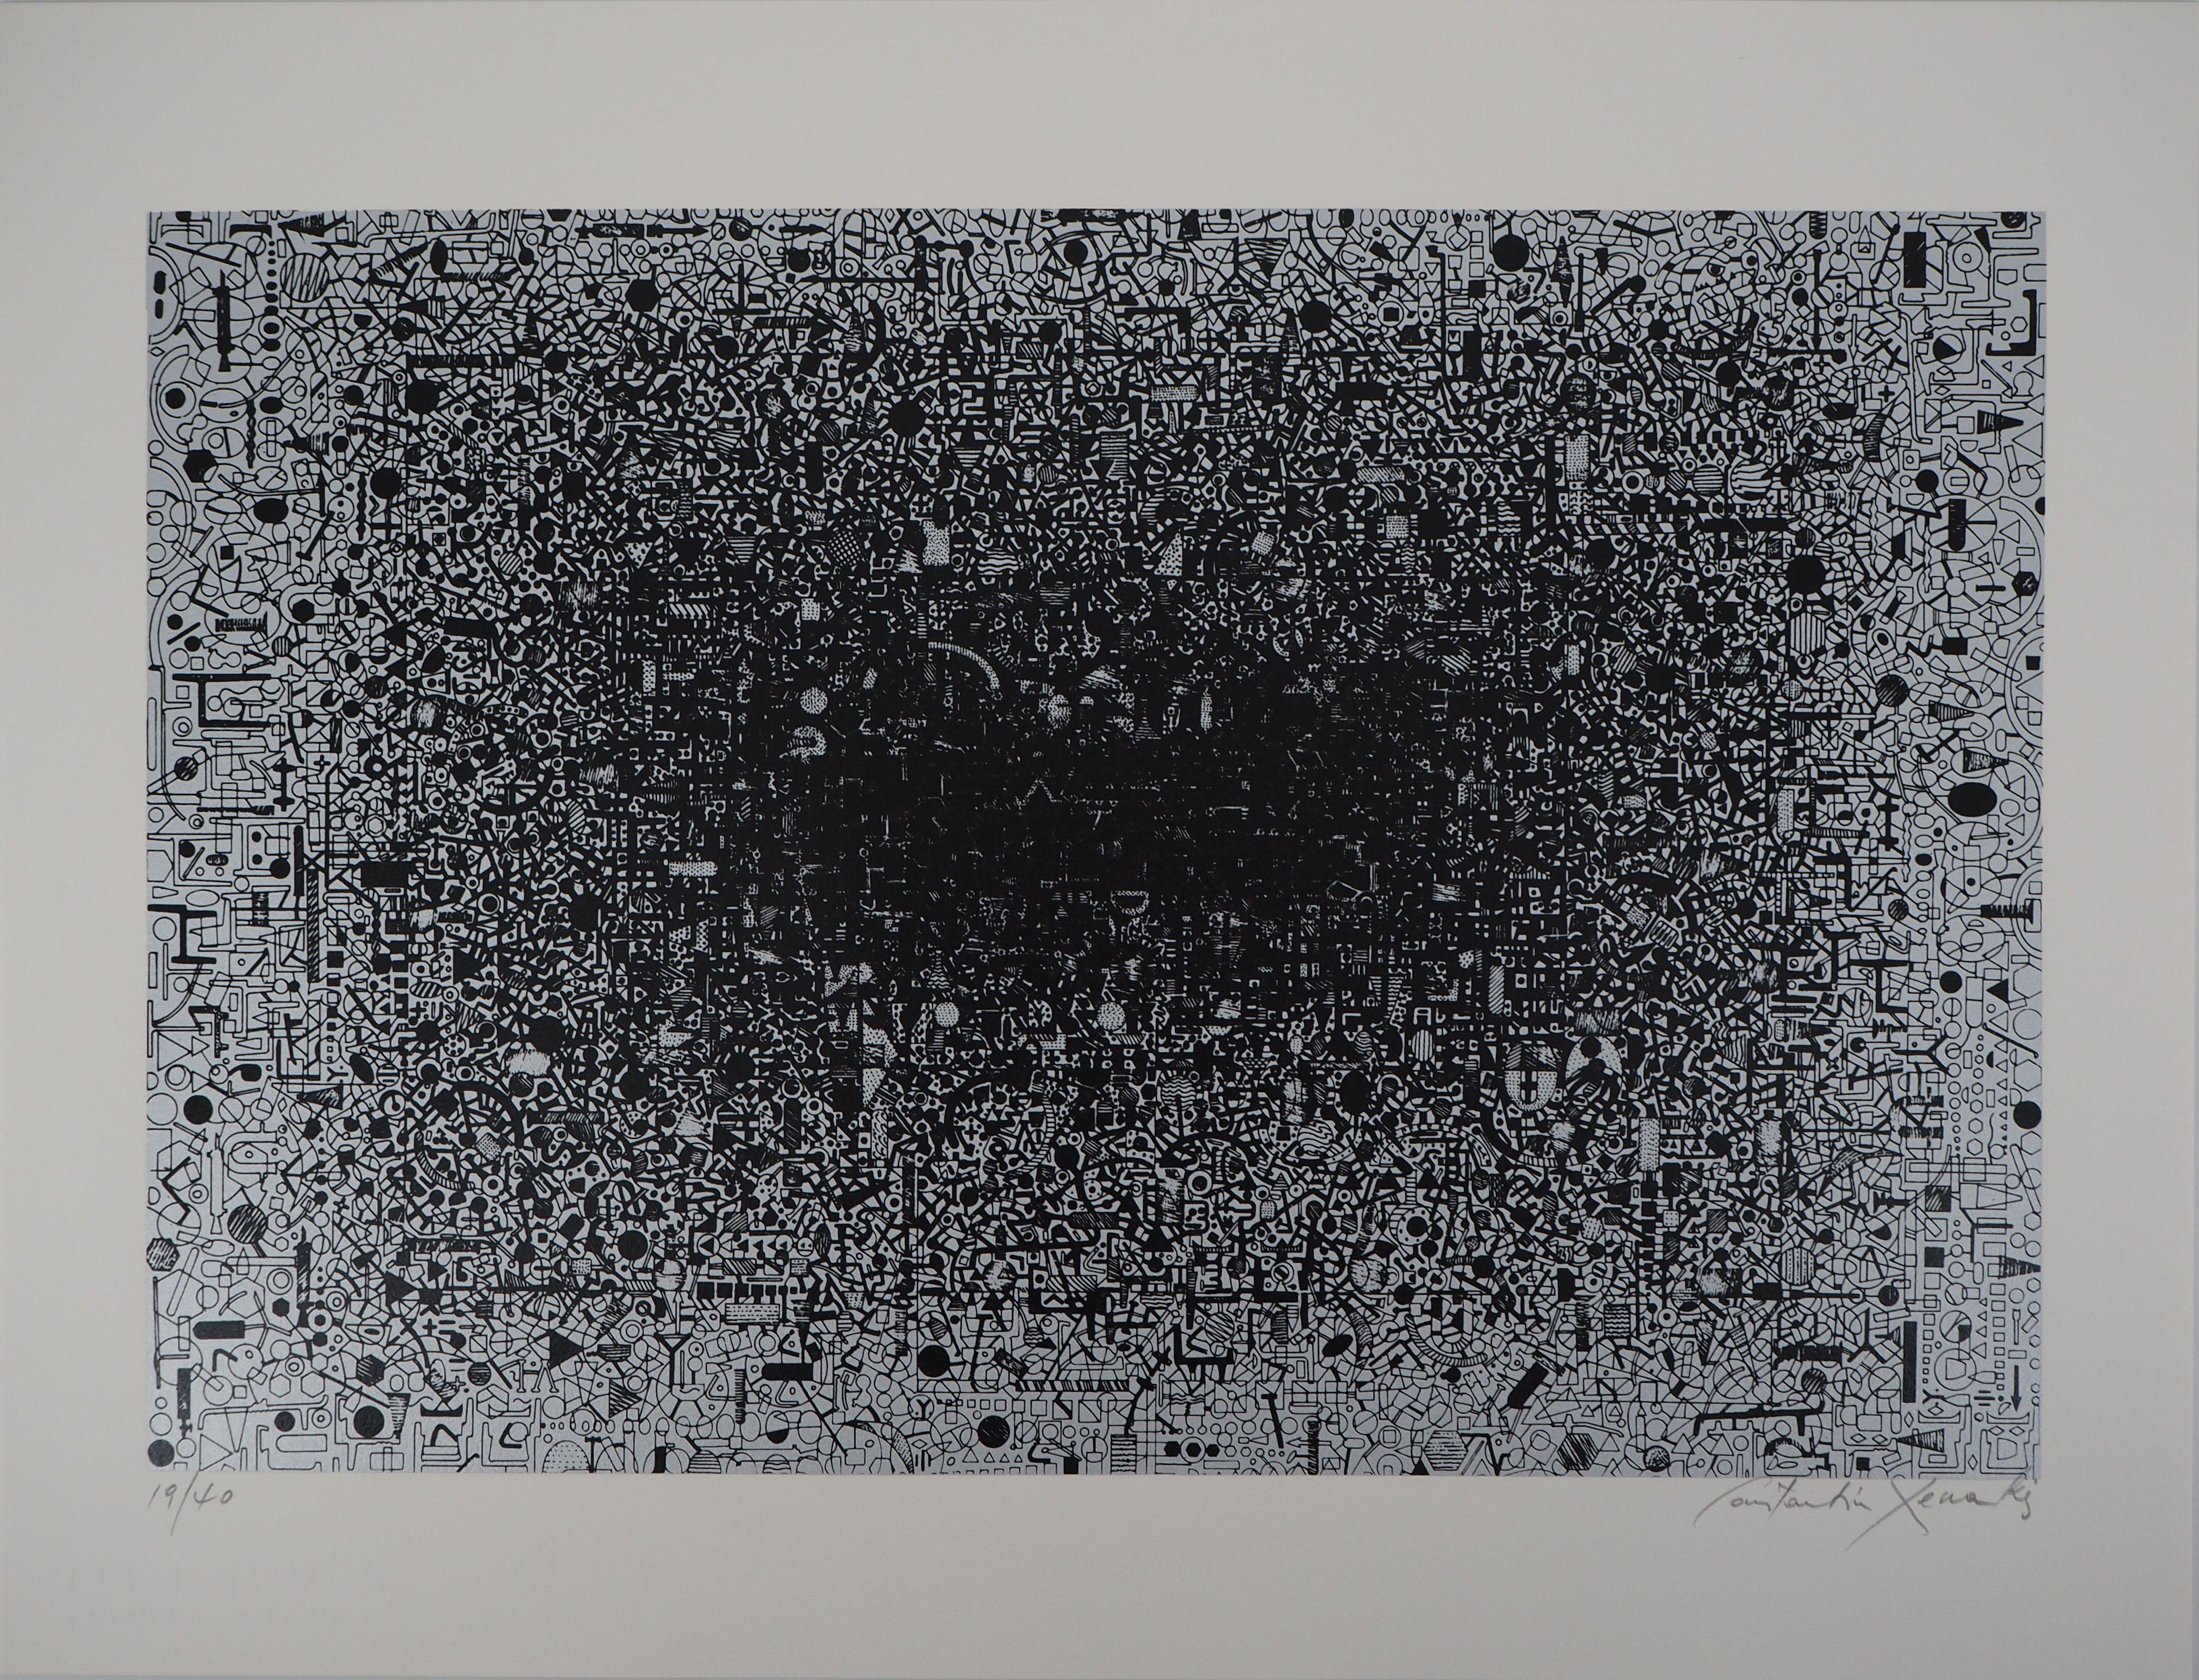 Constantin Xenakis Abstract Print - Electronic, Complexity of MicroSystems Silver - Original Handsigned Screen Print